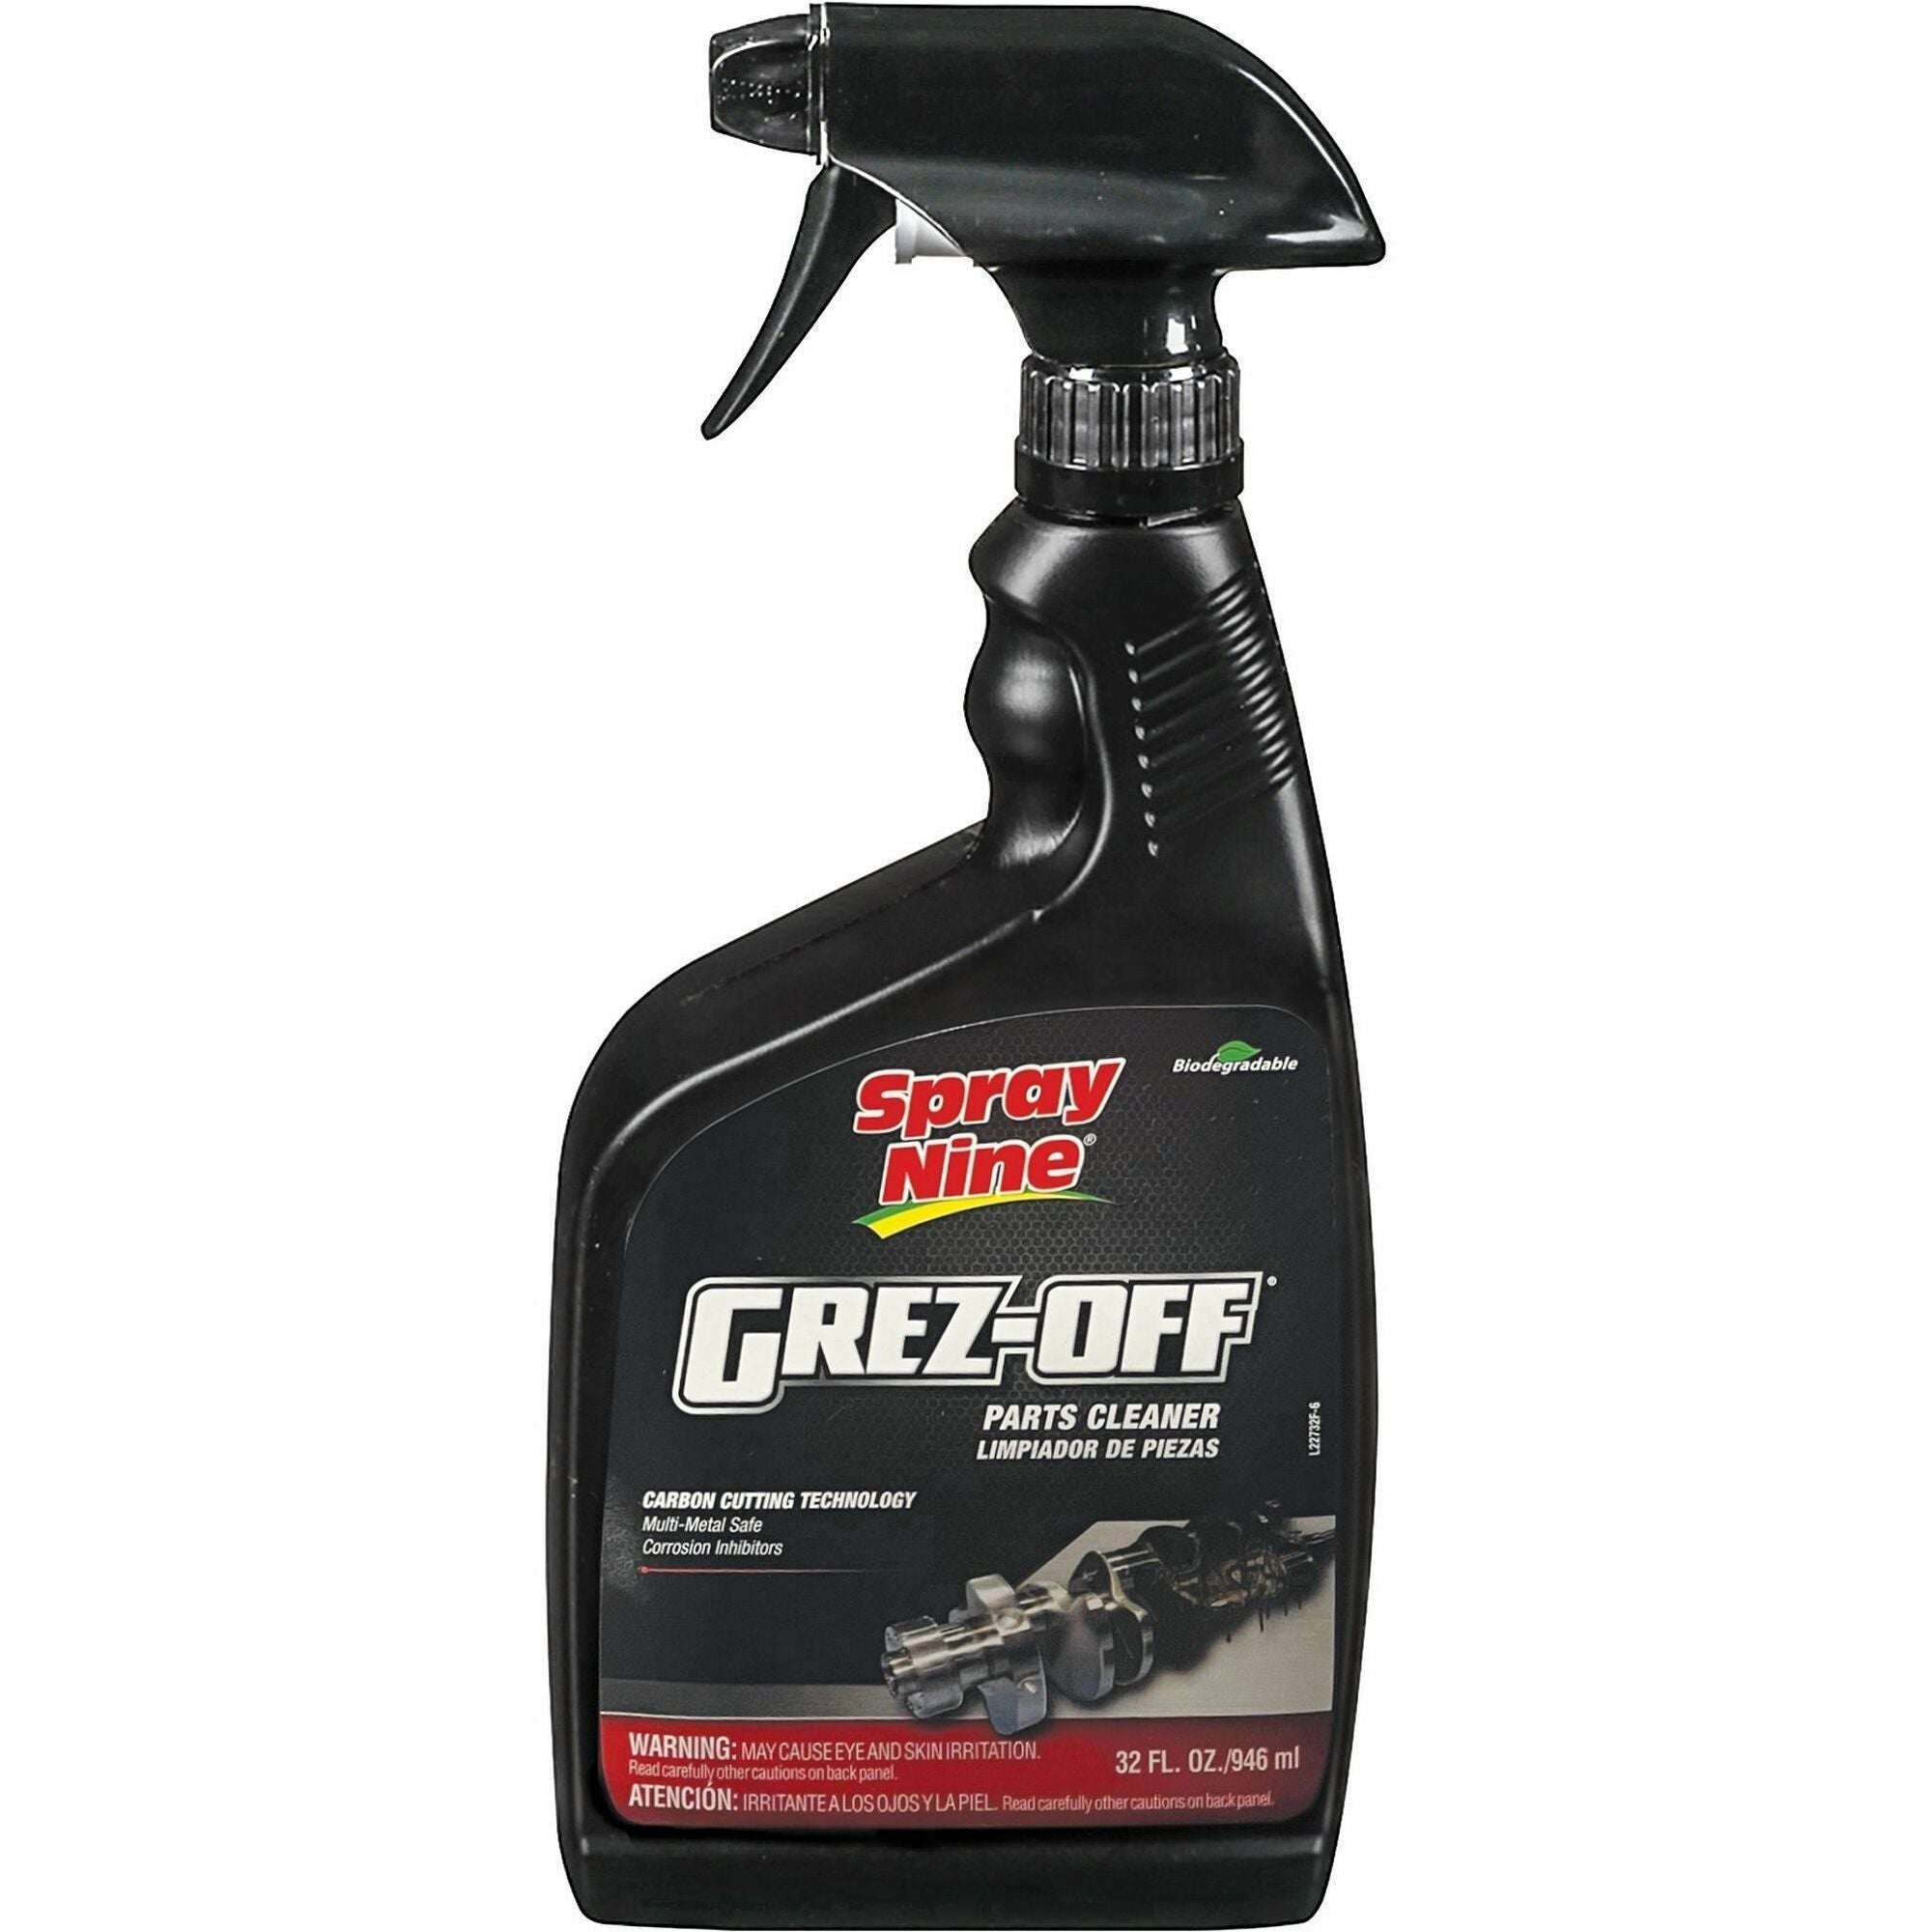 Spray Nine Grez-Off Parts Cleaner Degreaser - For Multipurpose - 32 fl oz (1 quart)Bottle - 12 / Carton - Non-flammable, Solvent-free, Water Soluble, VOC-free, Odorless, Fume-free, Heavy Duty - Clear